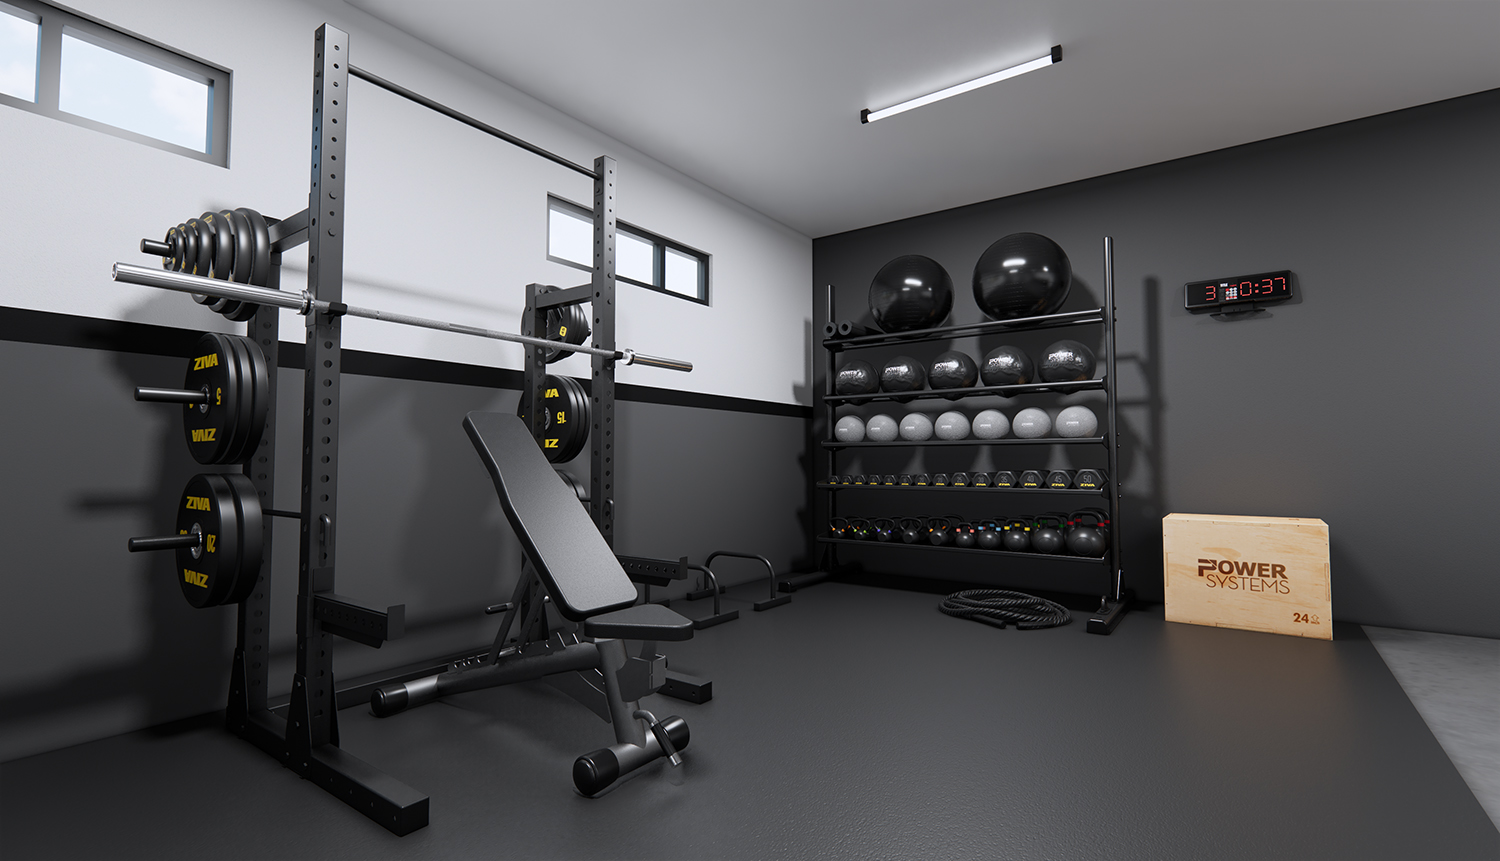 Home Gym Equipment, Workout & Products